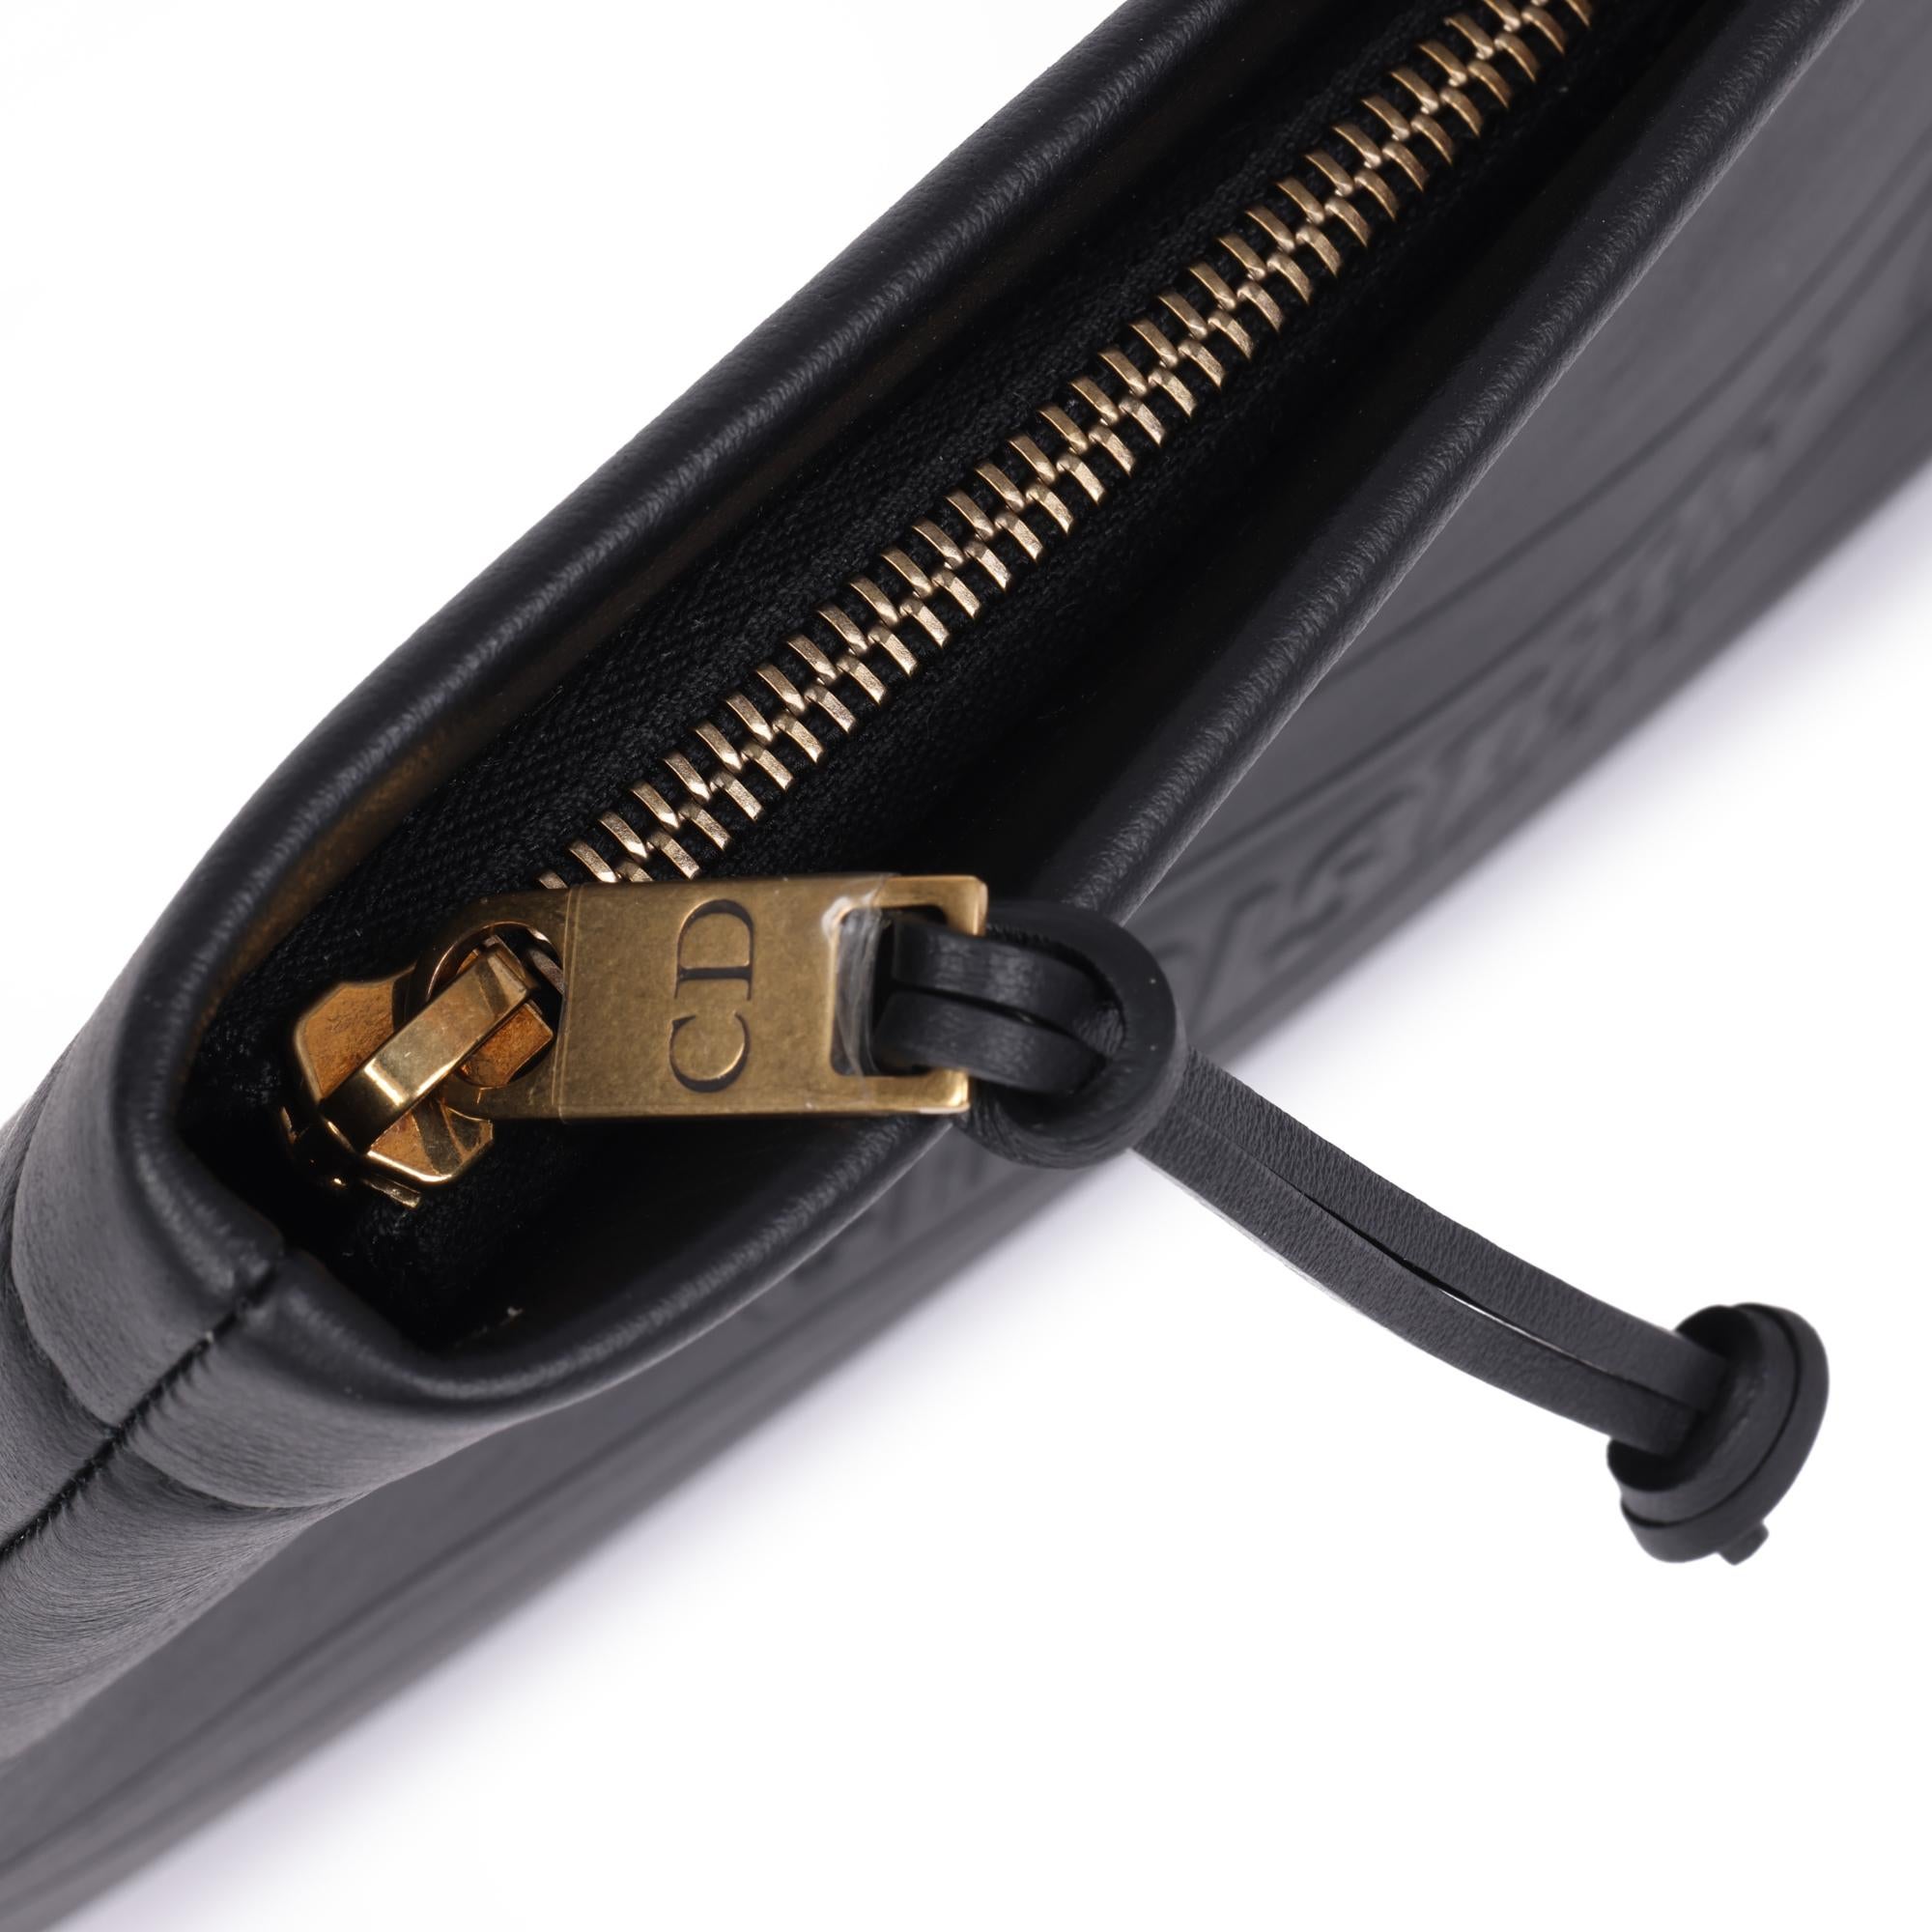 CHRISTIAN DIOR
Black Calfskin Leather Clutch

Serial Number: 19-MA-1200
Age (Circa): 2020
Authenticity Details: Date Stamp (Made in Italy)
Gender: Ladies
Type: Clutch

Colour: Black
Hardware: Antiqued Gold
Material(s): Calfskin Leather
Interior: